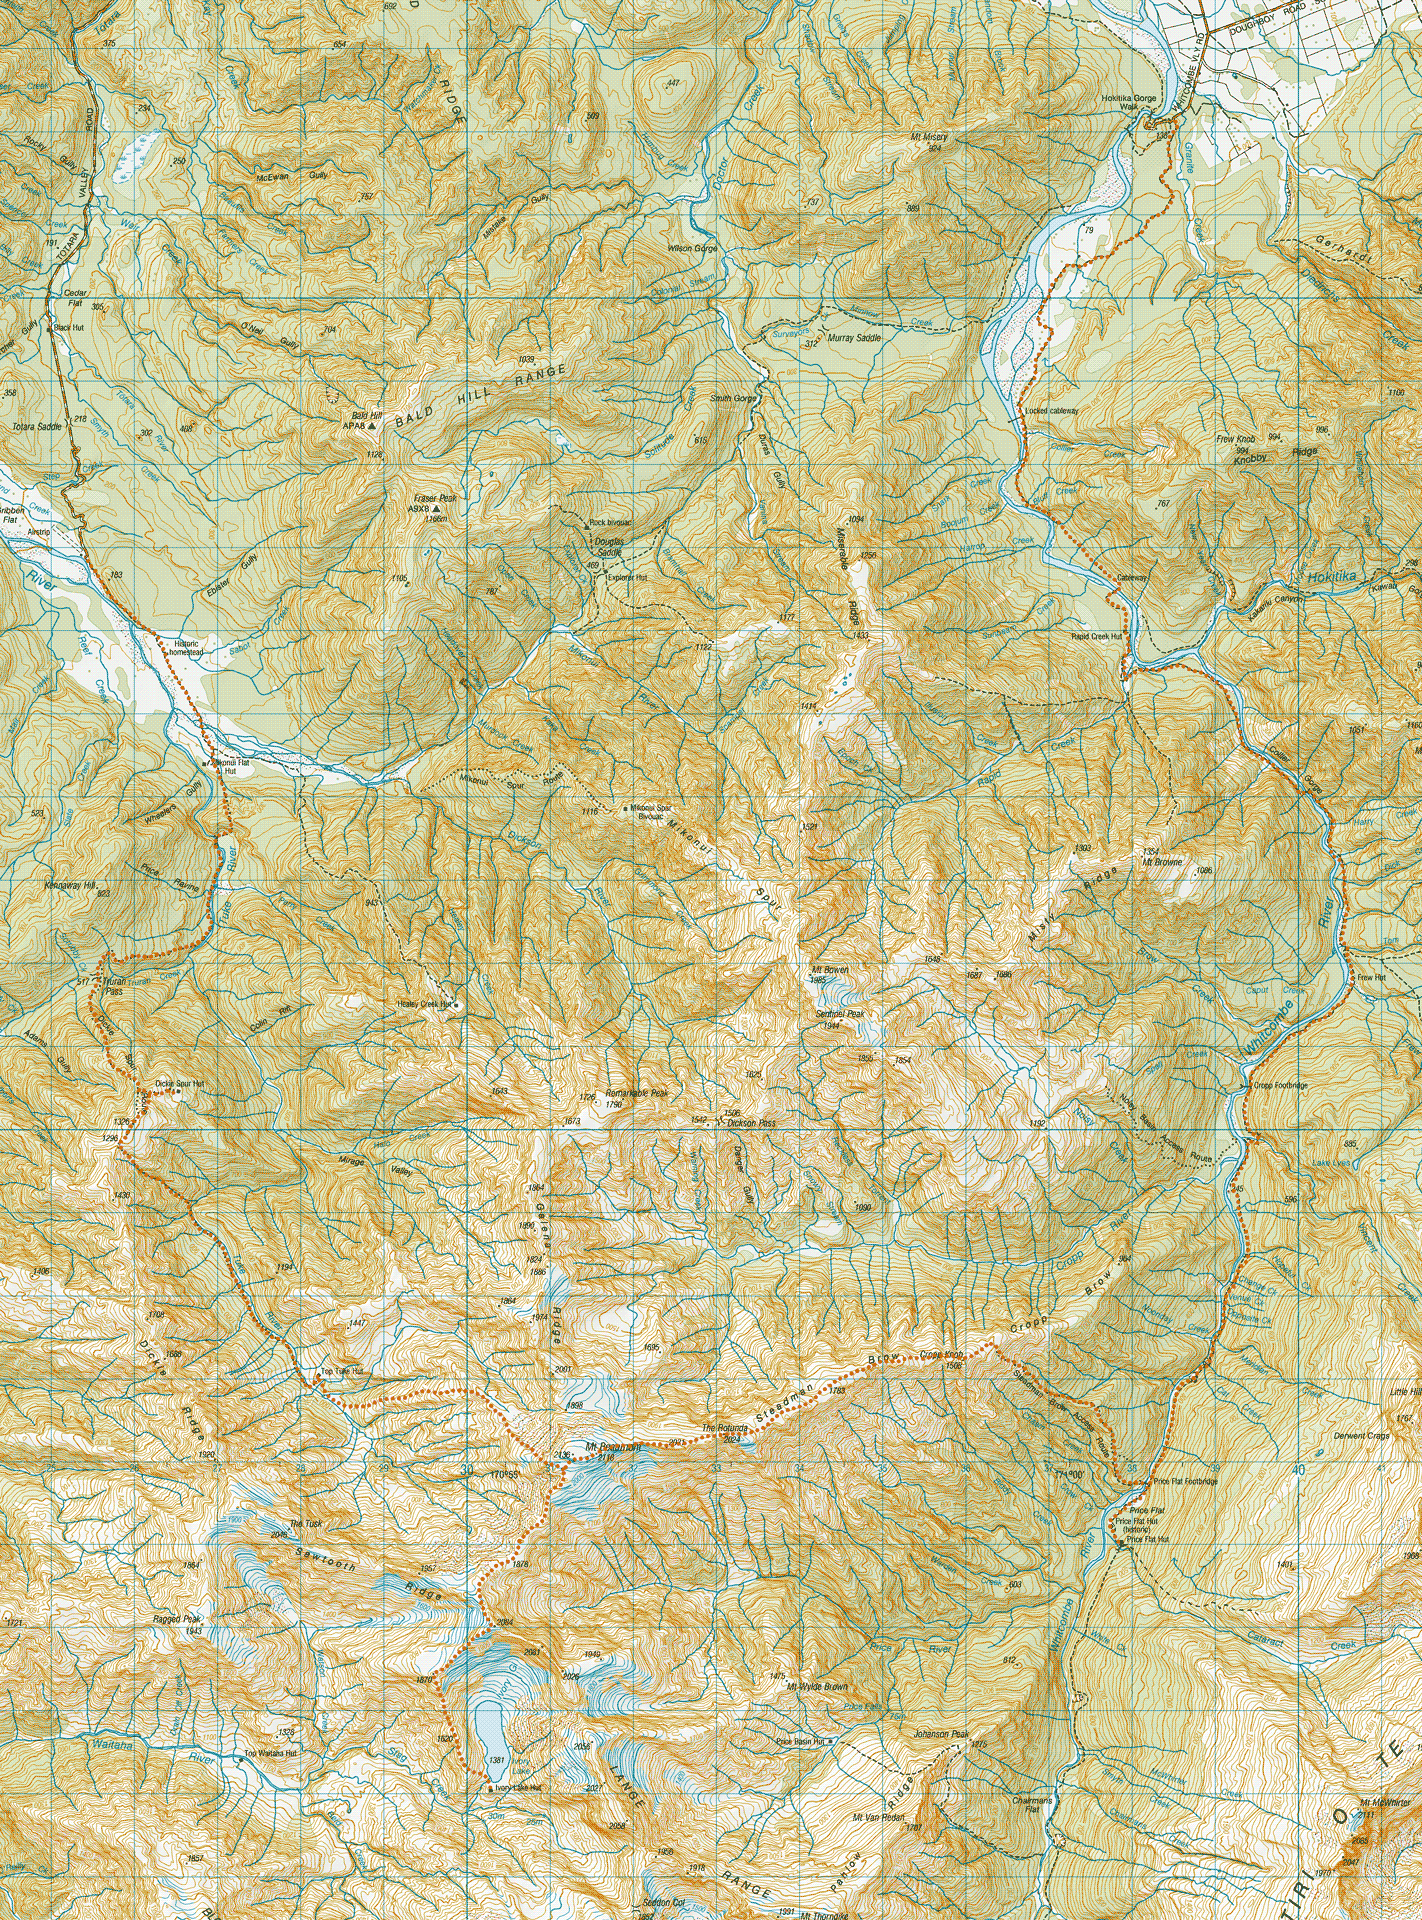 Topographical map showing route to Ivory Lake